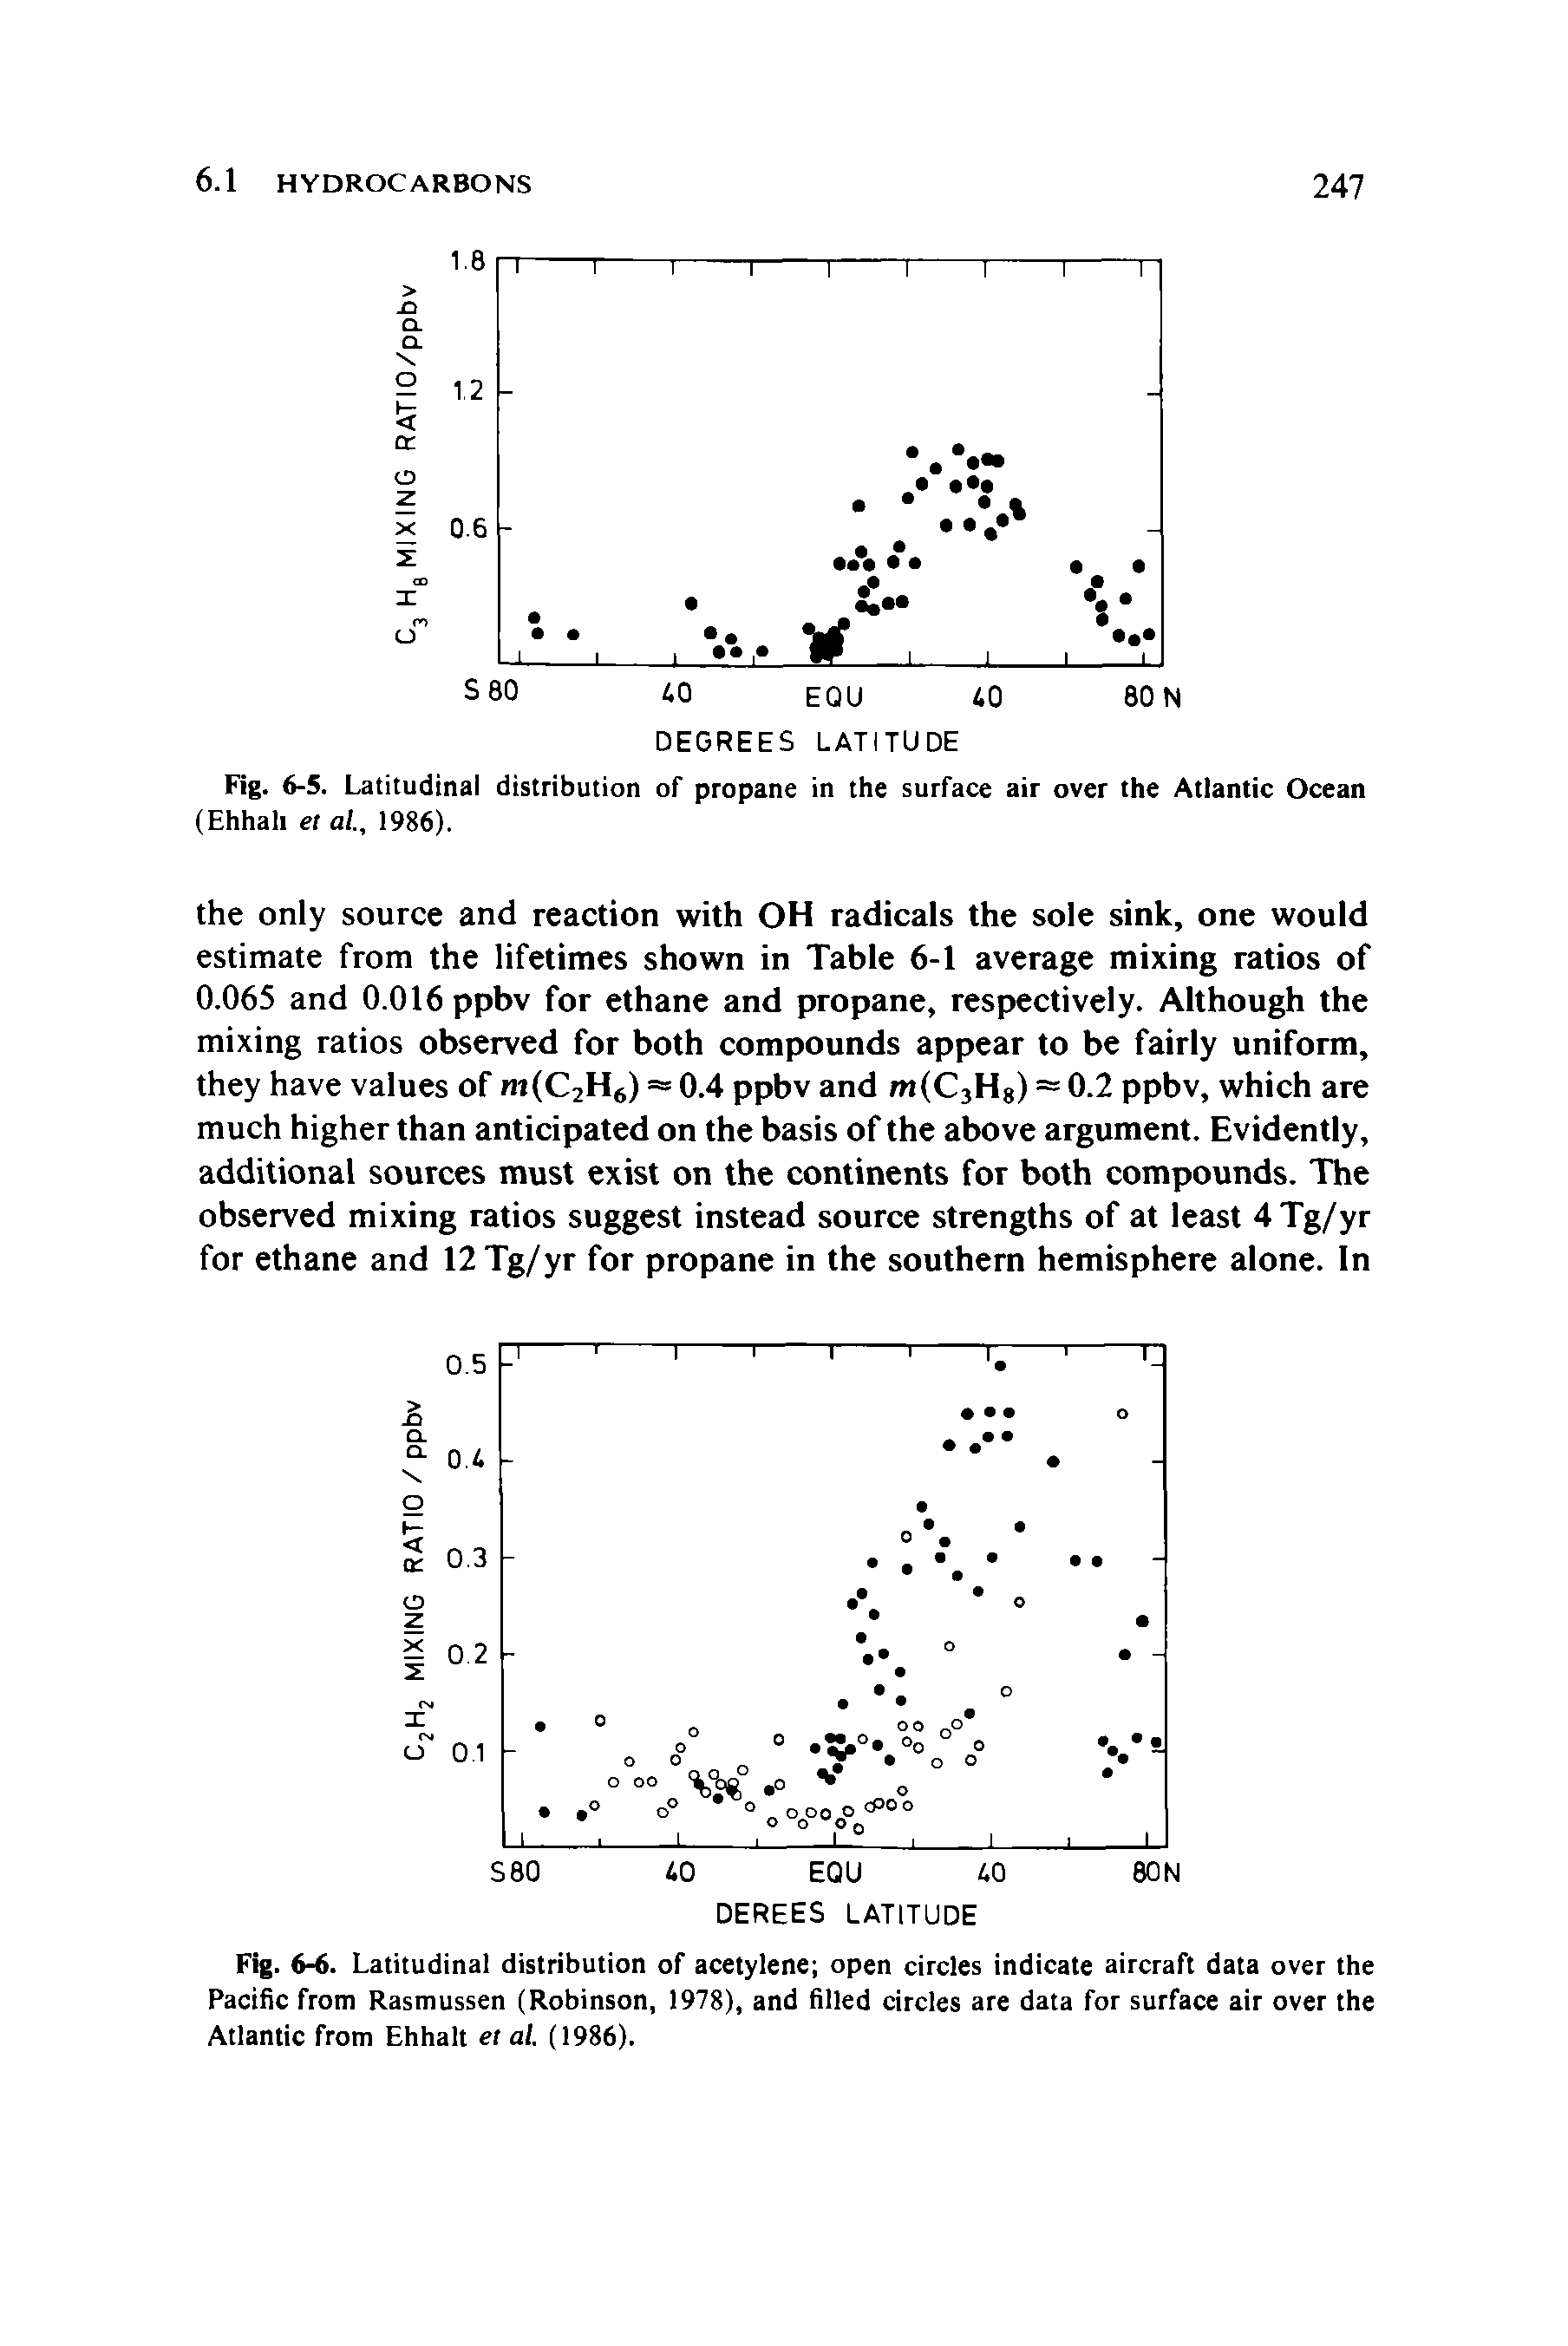 Fig. 6-6. Latitudinal distribution of acetylene open circles indicate aircraft data over the Pacific from Rasmussen (Robinson, 1978), and filled circles are data for surface air over the Atlantic from Ehhalt et al. (1986).